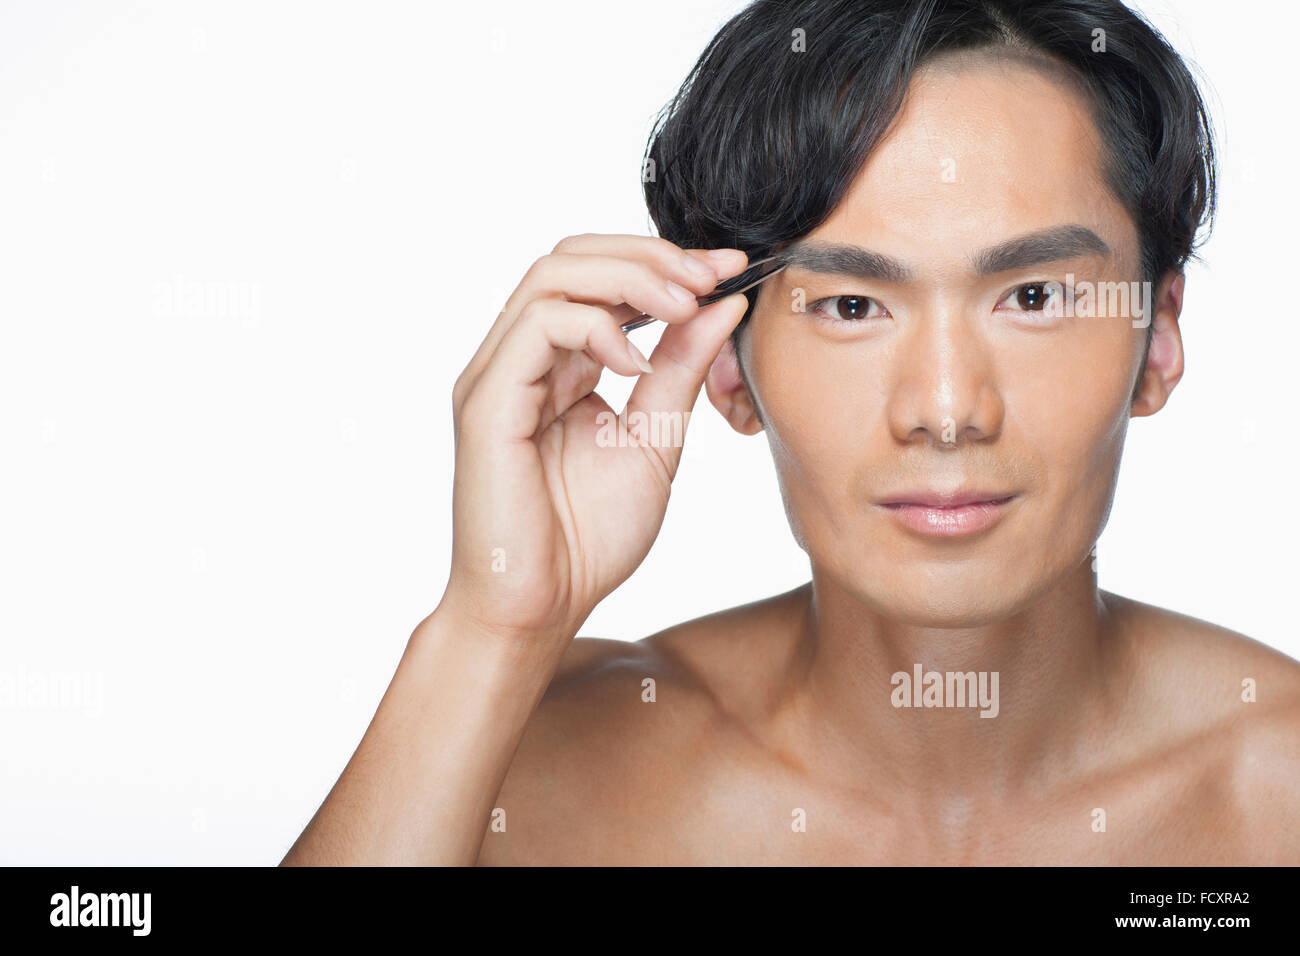 Portrait of young man tweezing eyebrow staring at front Stock Photo